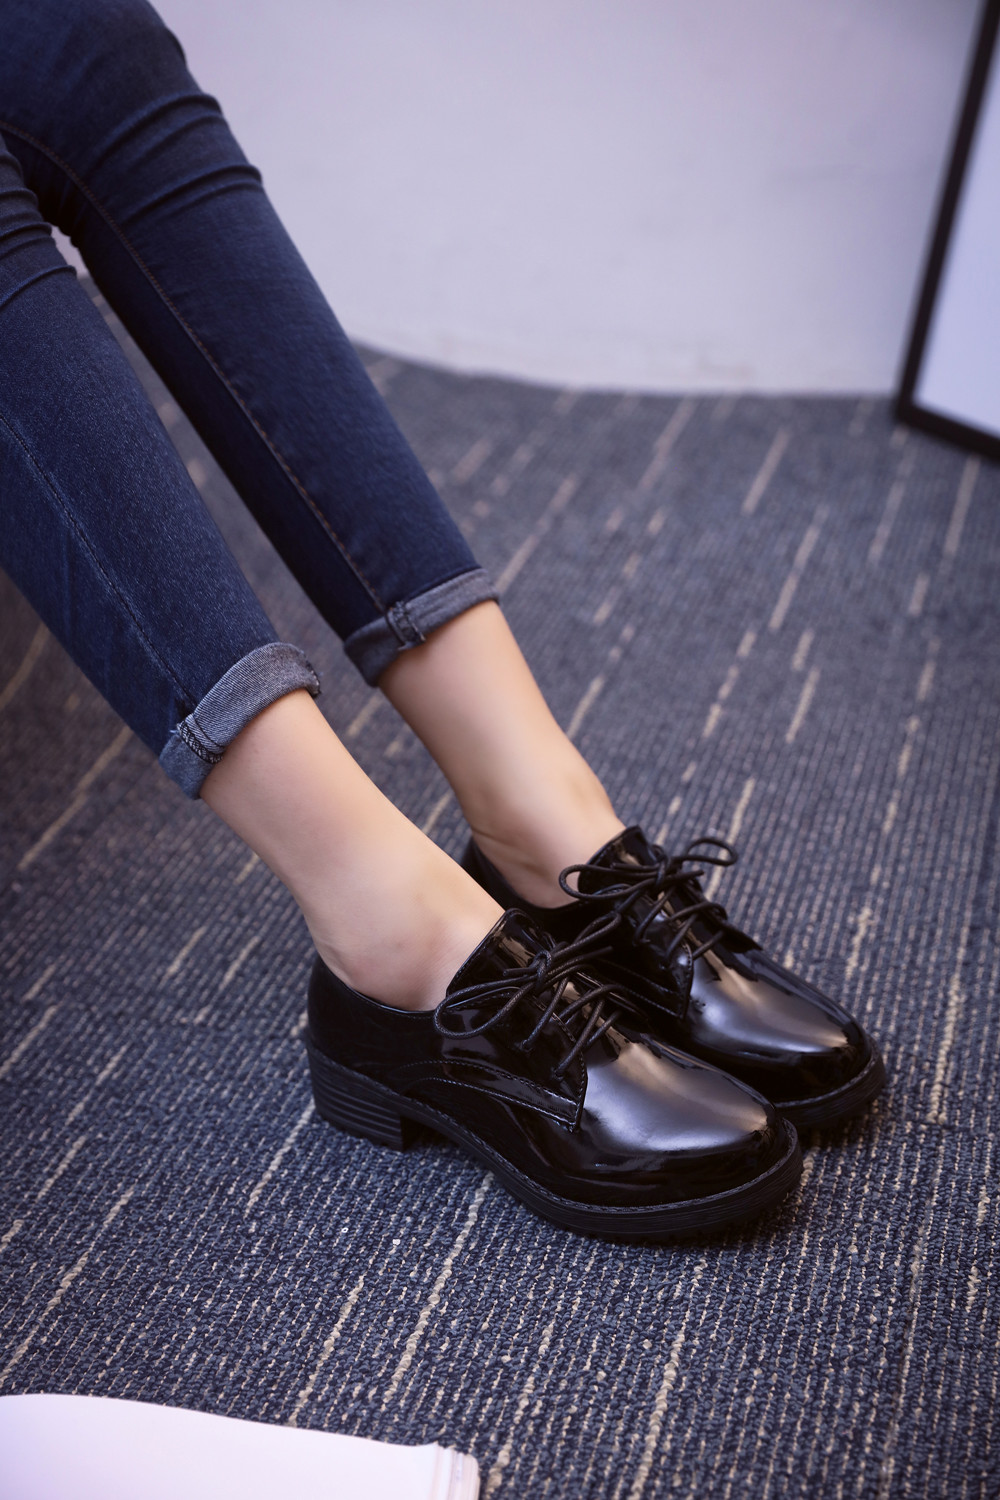 Black Leather Shoes With College Women's Shoes